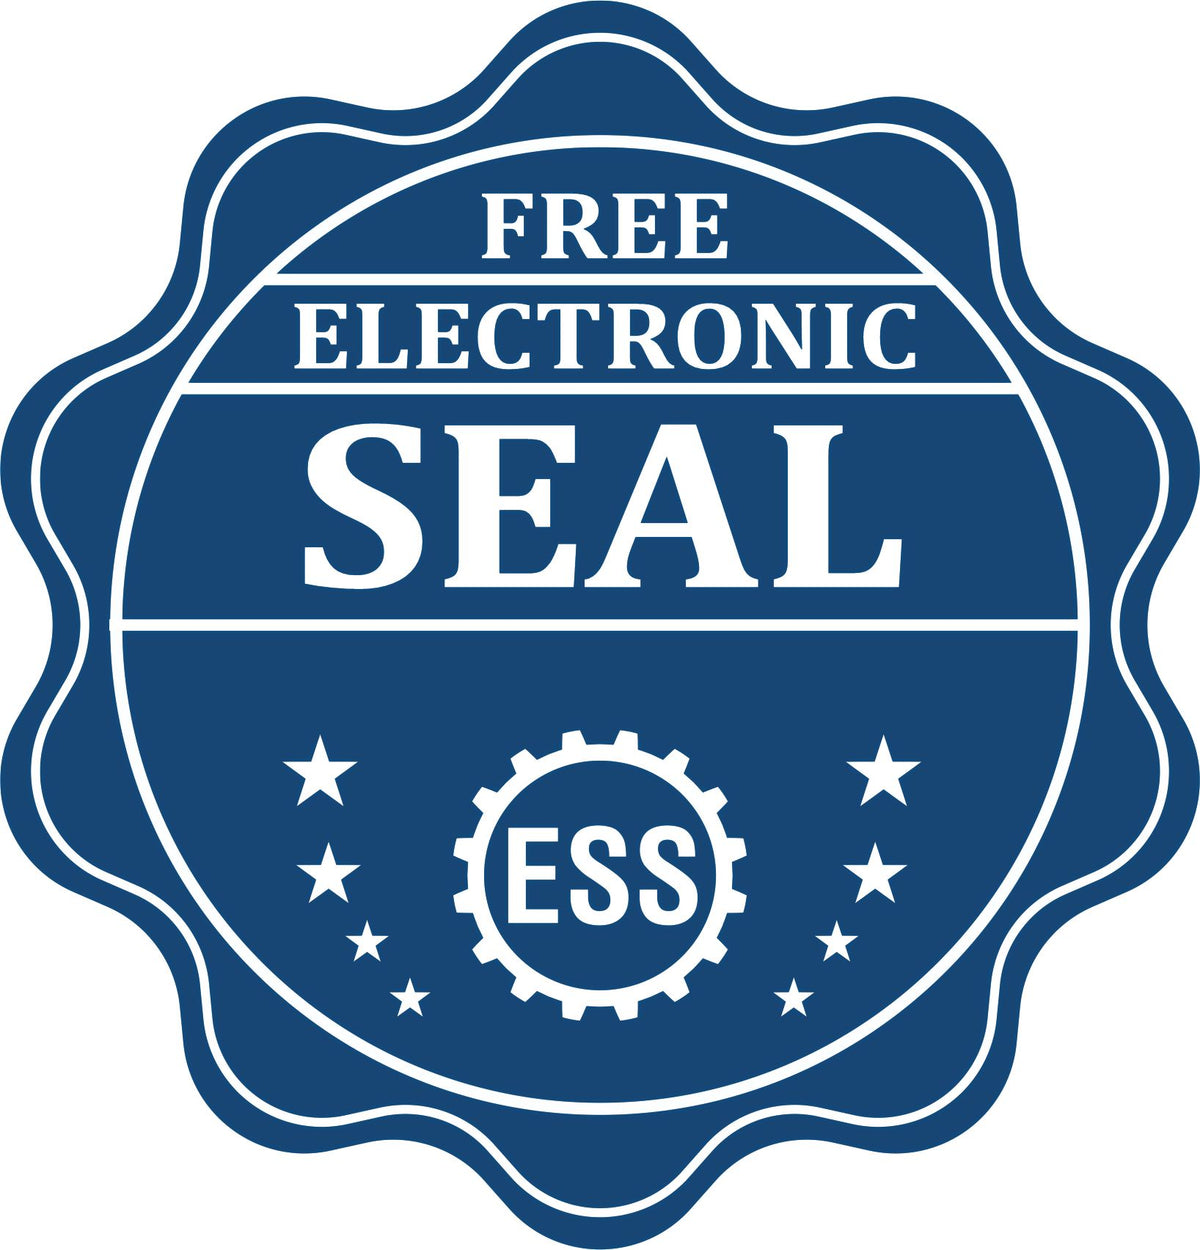 A badge showing a free electronic seal for the Soft Pocket Wyoming Landscape Architect Embosser with stars and the ESS gear on the emblem.